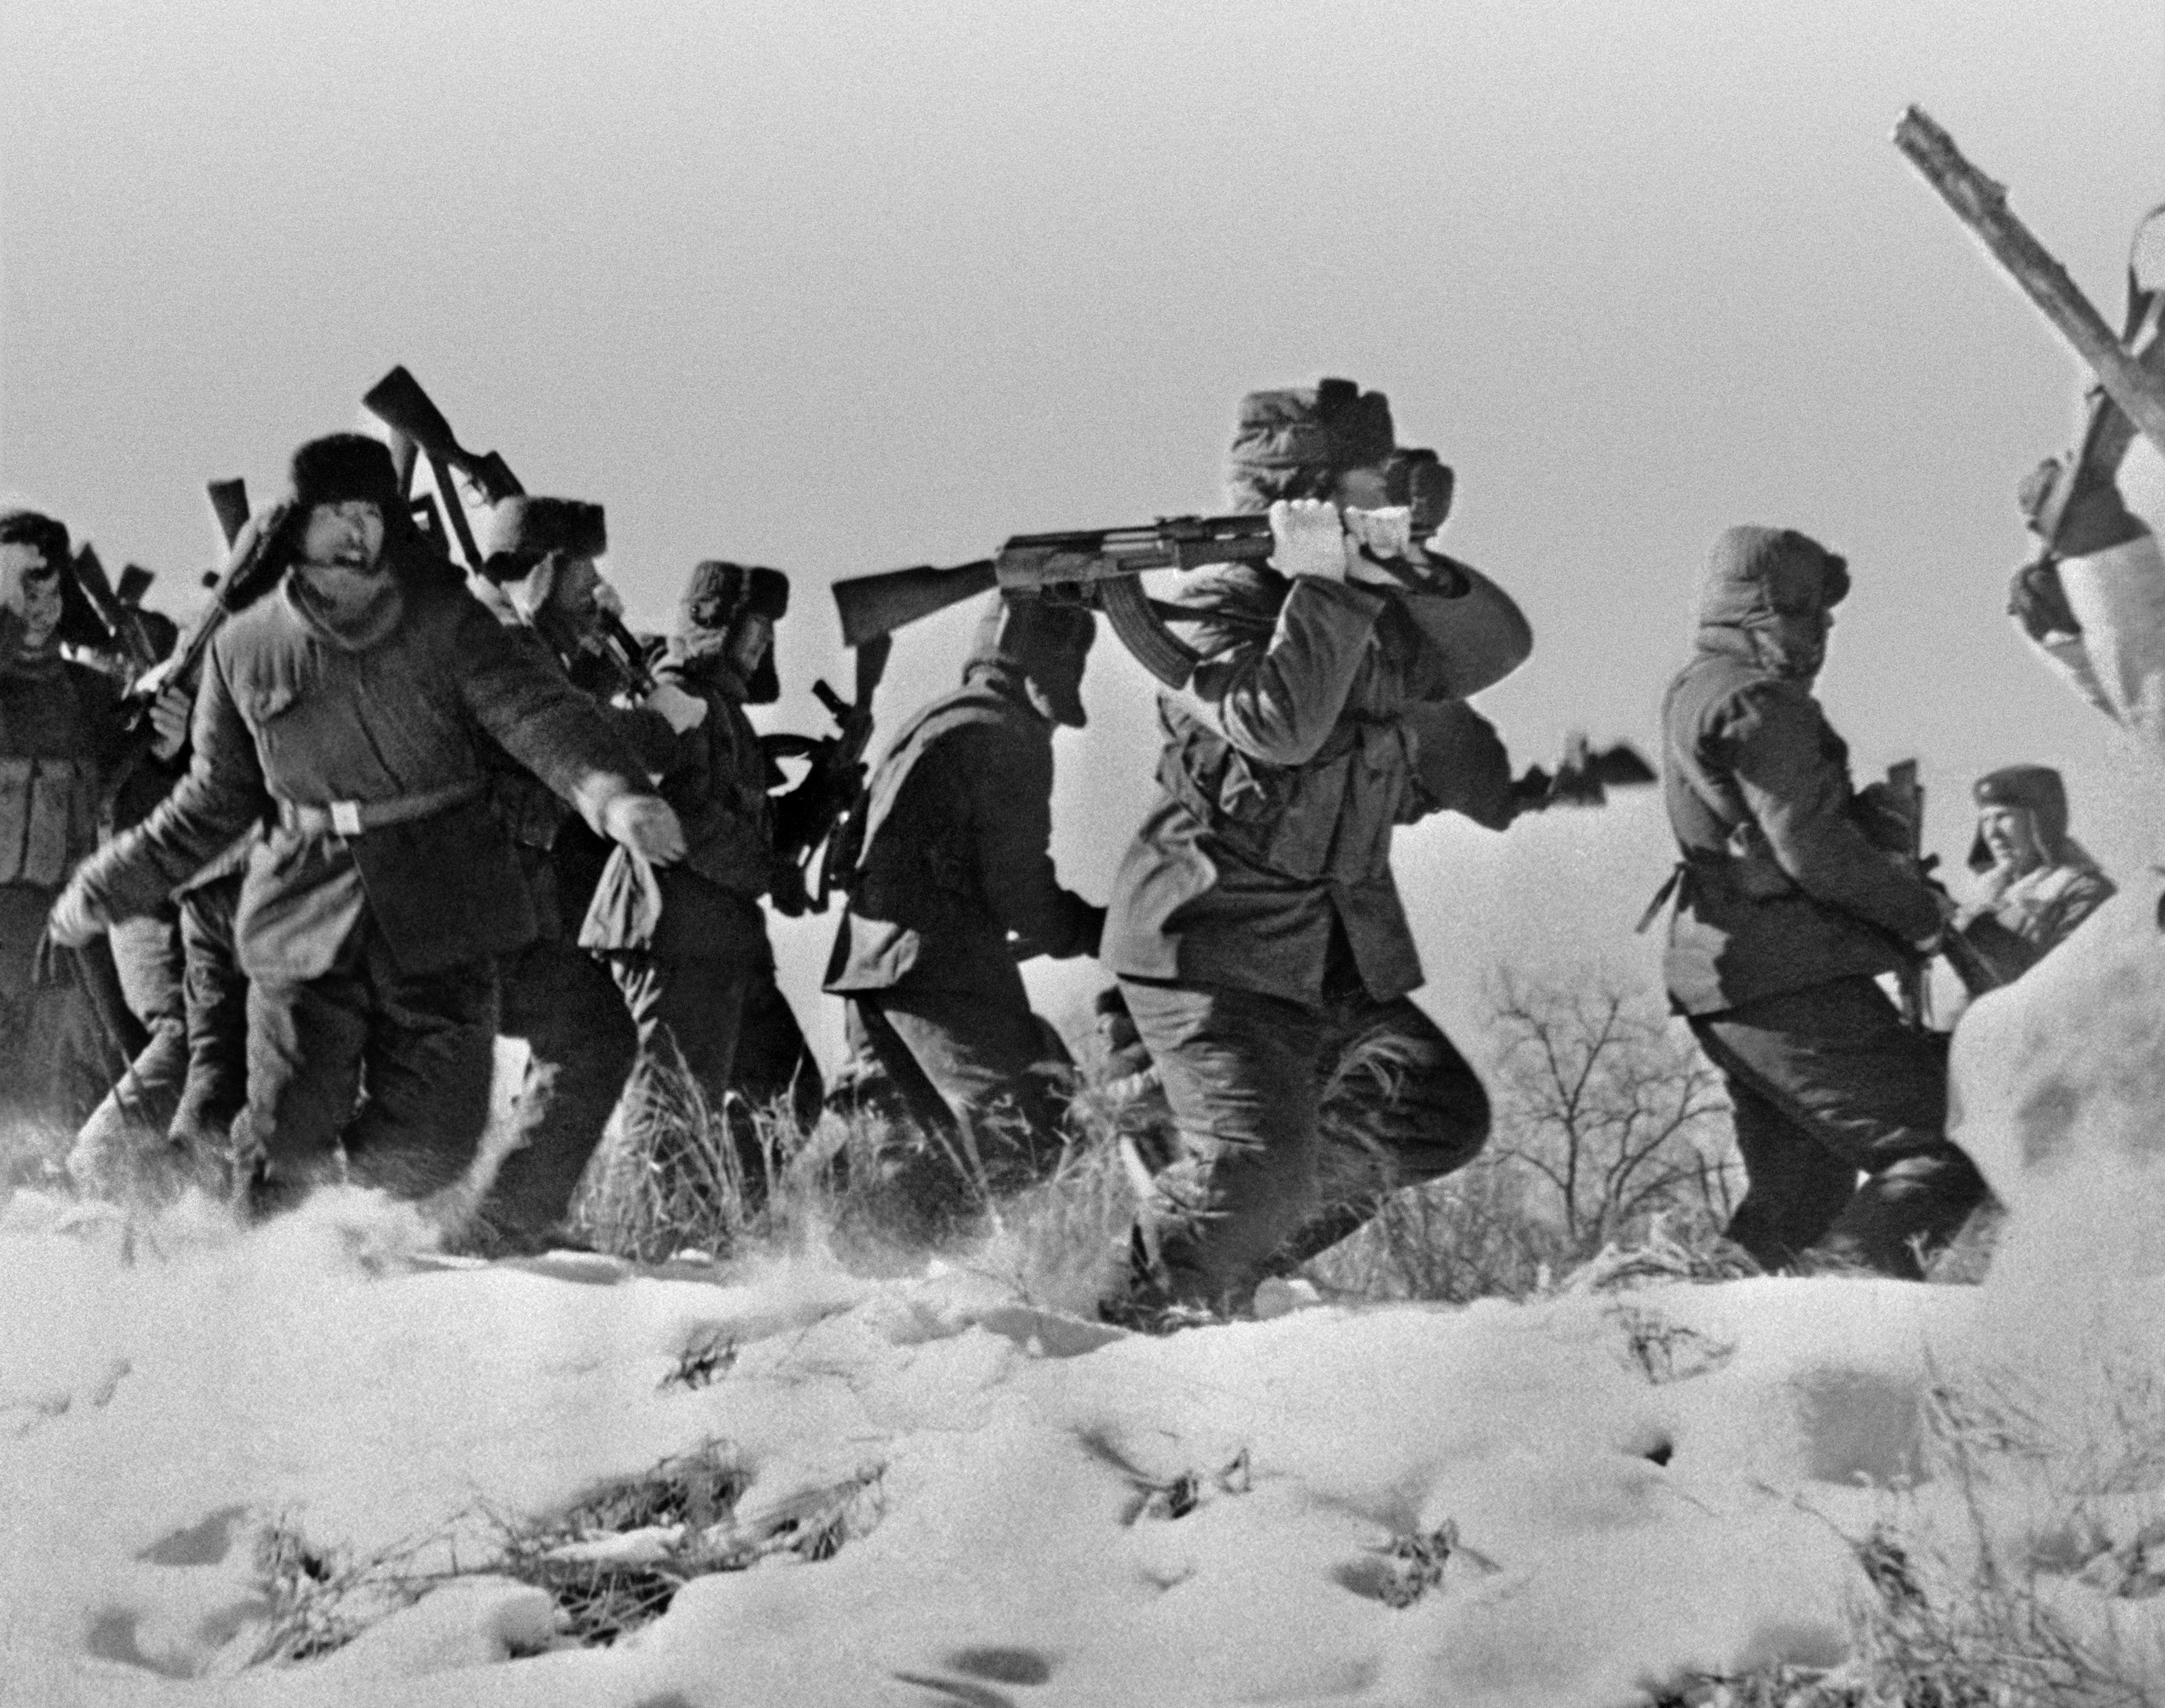 Chinese soldiers trying to enter Damansky Island in the USSR during the 1969 Soviet-Chinese border conflict.